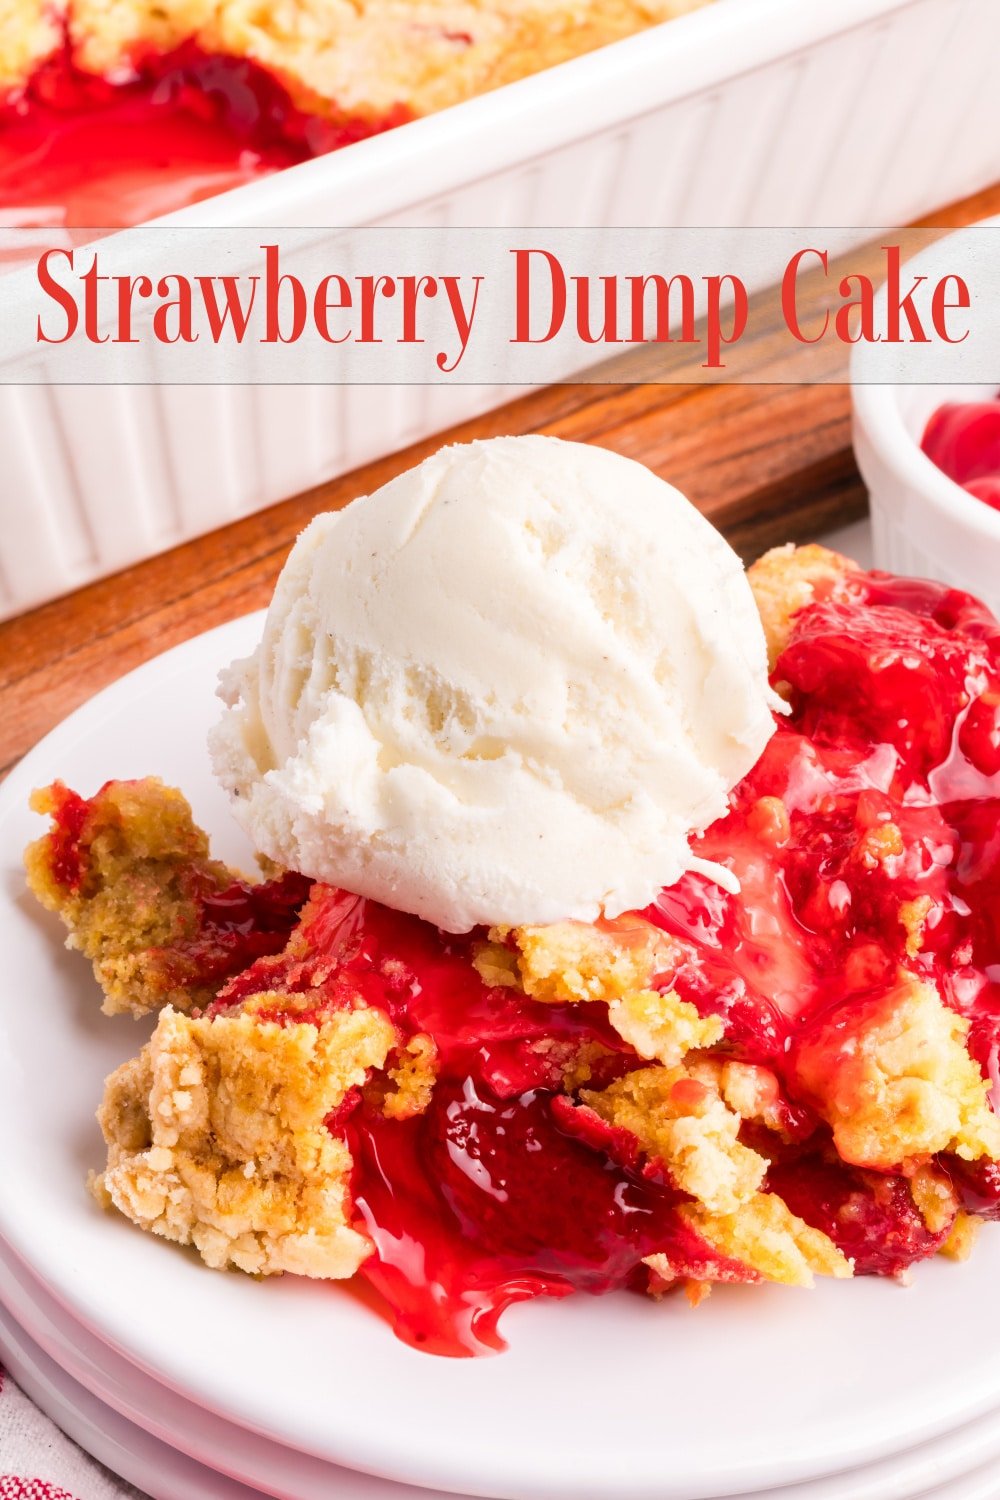 Make this quick and easy strawberry dump cake recipe. Top it off with creamy vanilla ice cream for an irresistible dessert. via @cmpollak1